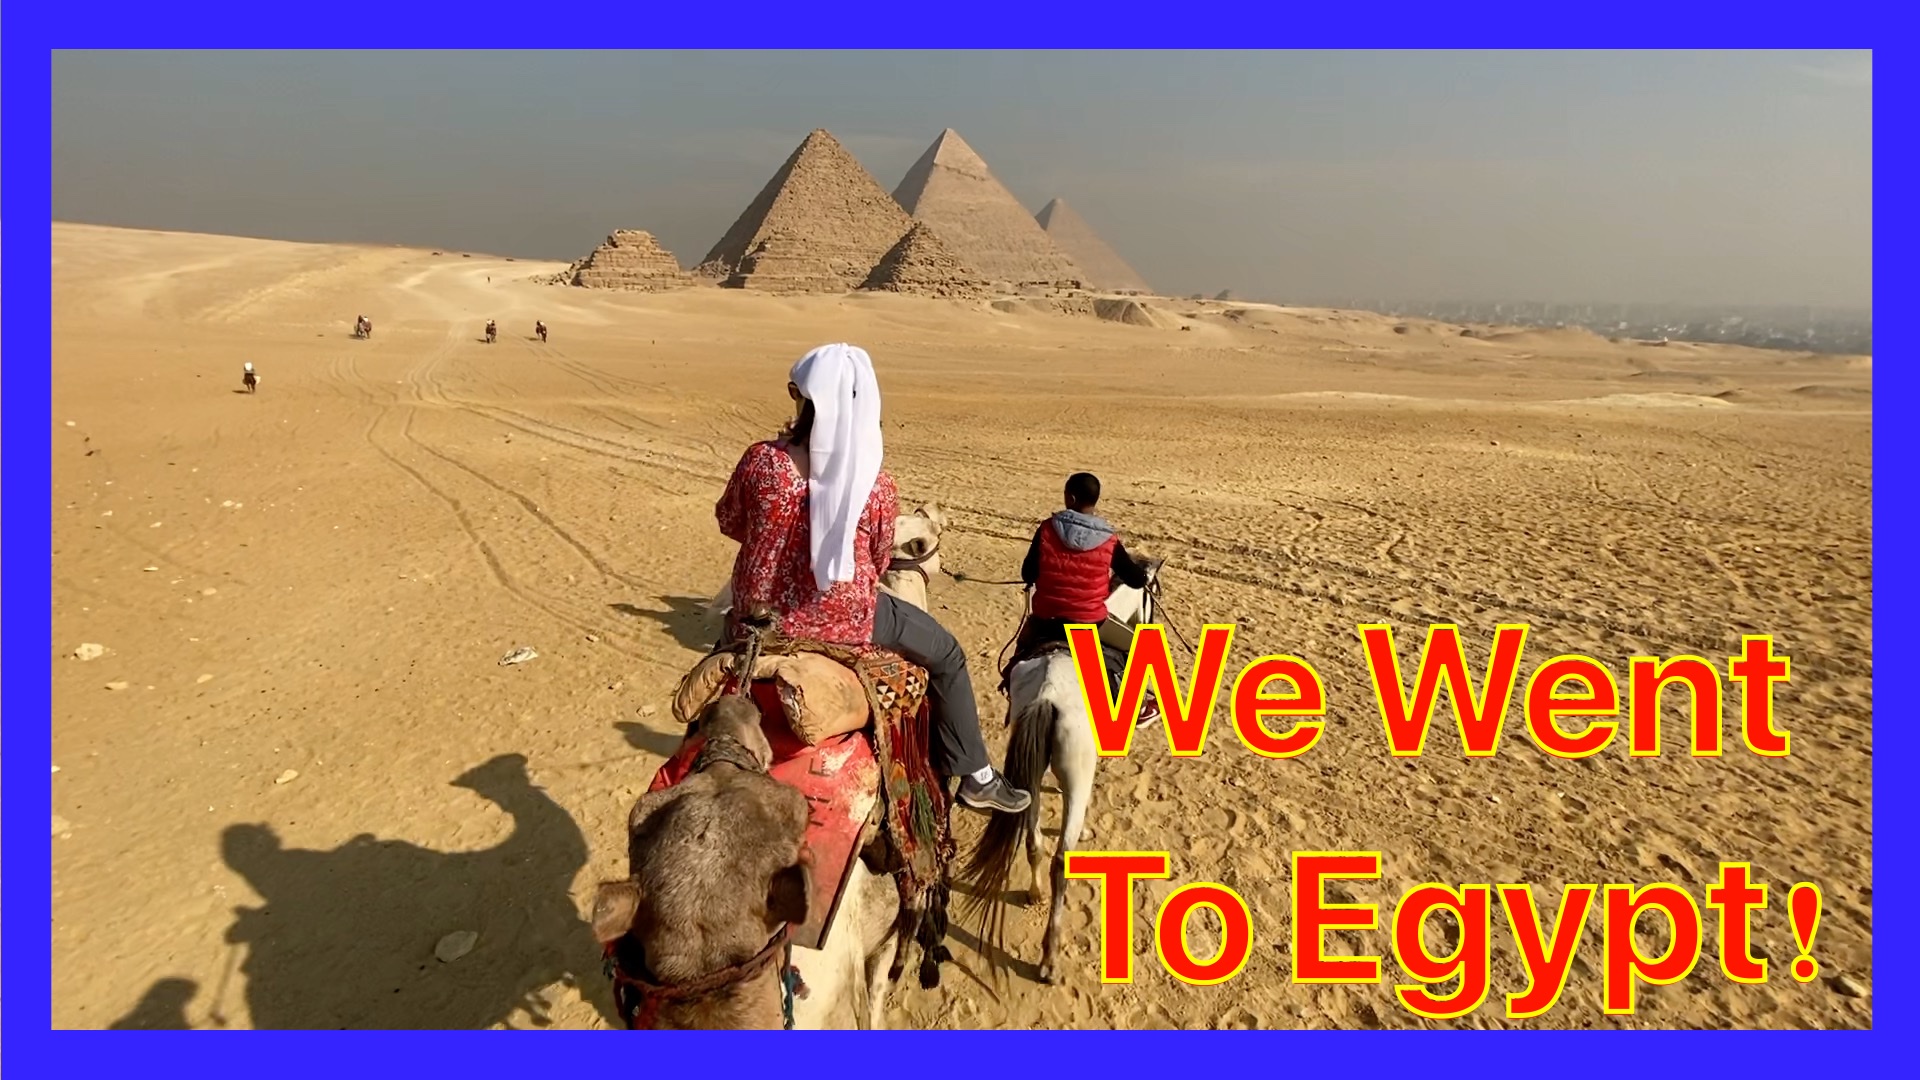 We Touched Pyramids: The Video